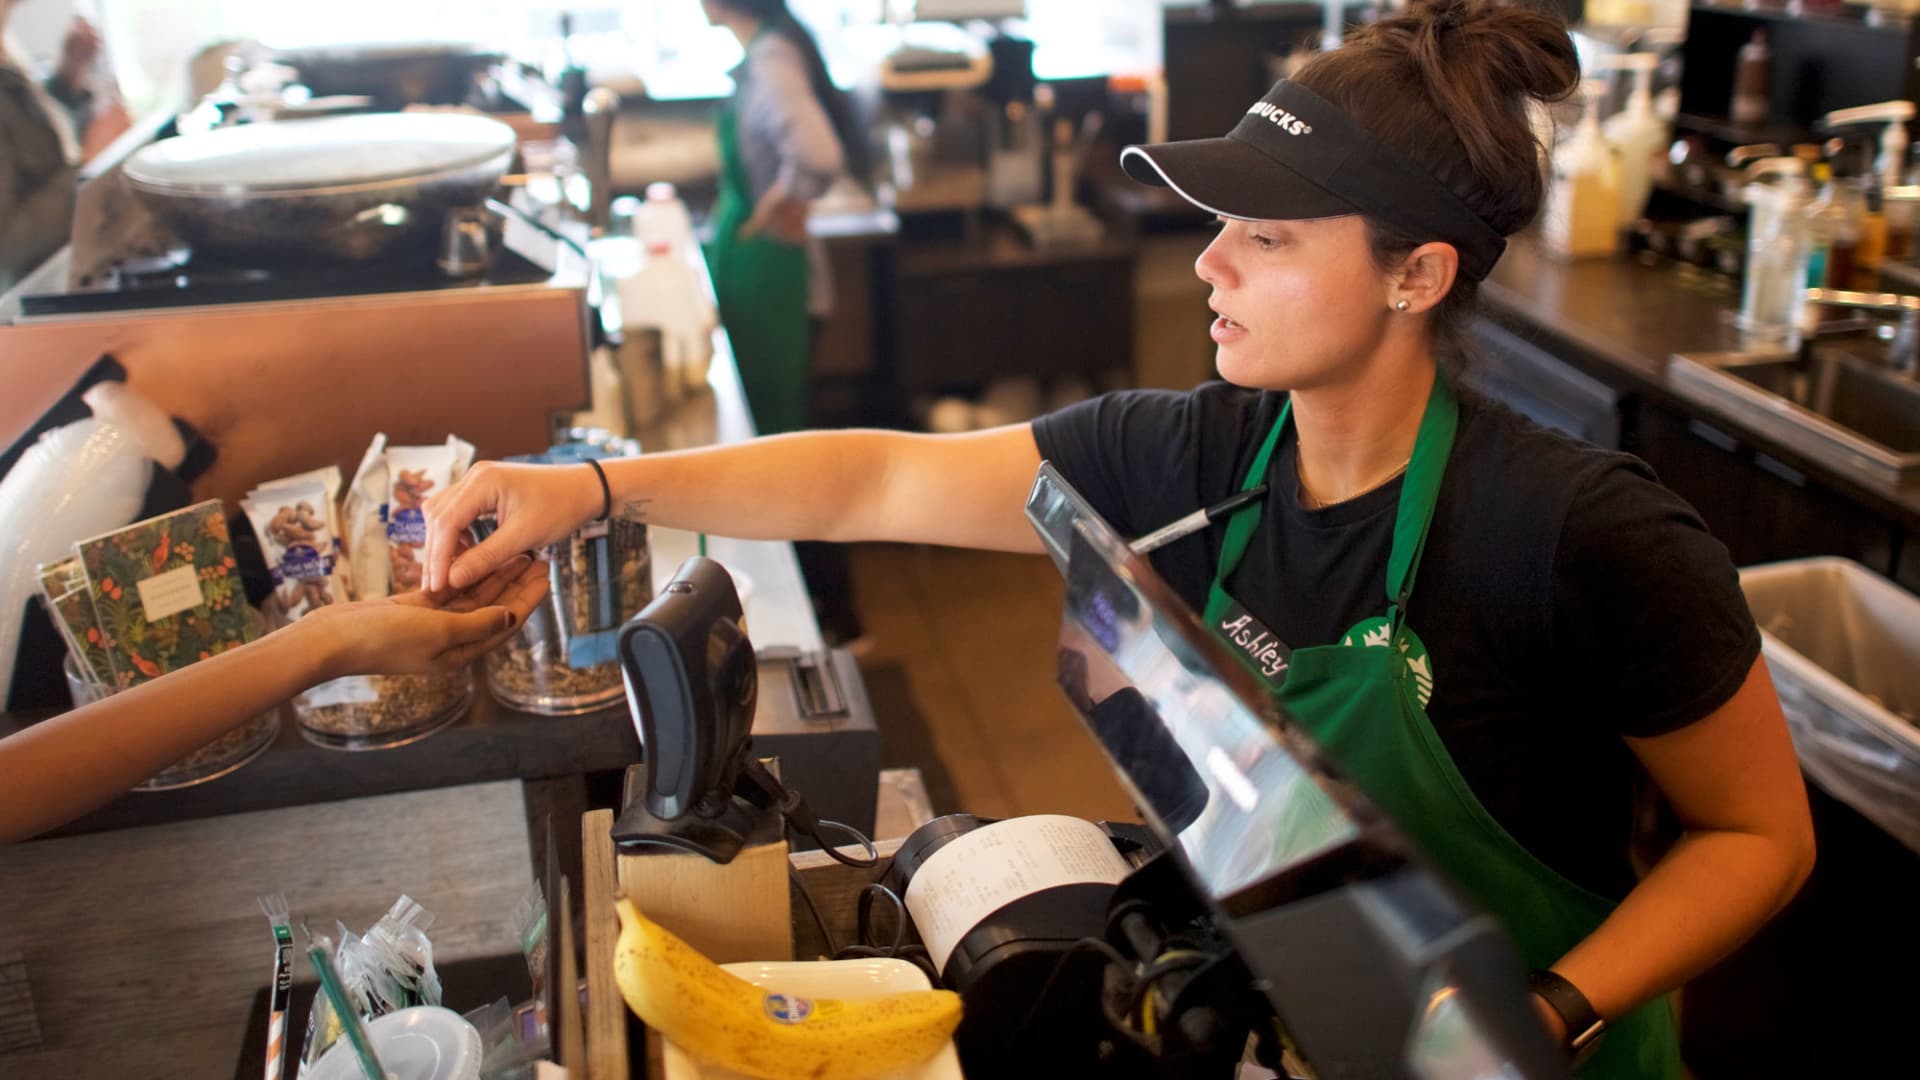 Starbucks to raise wages, double training for workers in the midst of union pressure